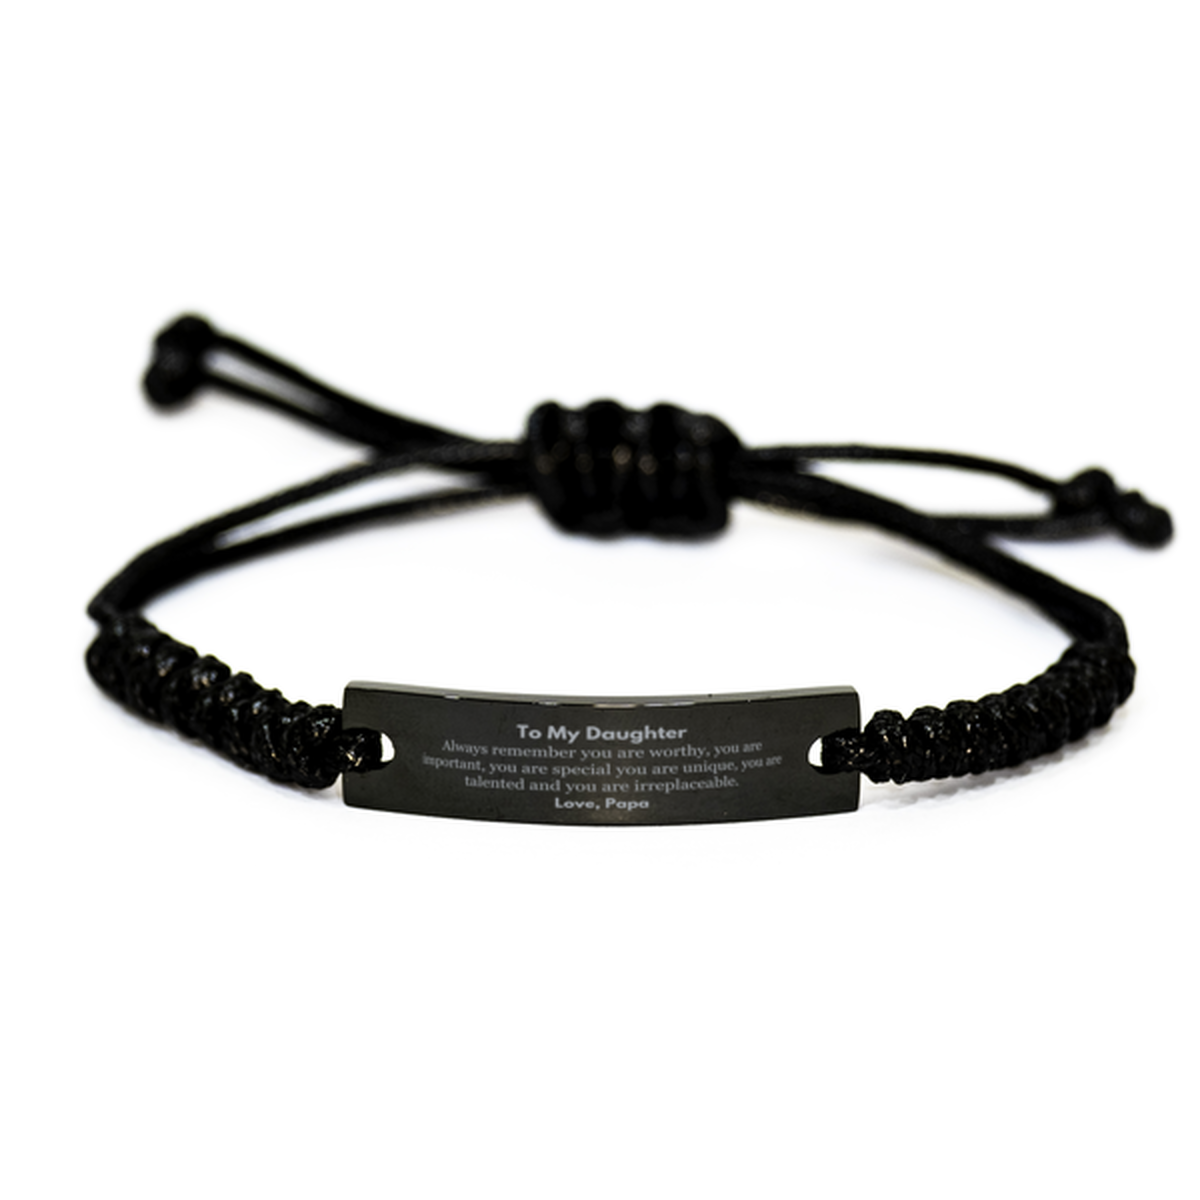 Daughter Birthday Gifts from Papa, Inspirational Black Rope Bracelet for Daughter Christmas Graduation Gifts for Daughter Always remember you are worthy, you are important. Love, Papa